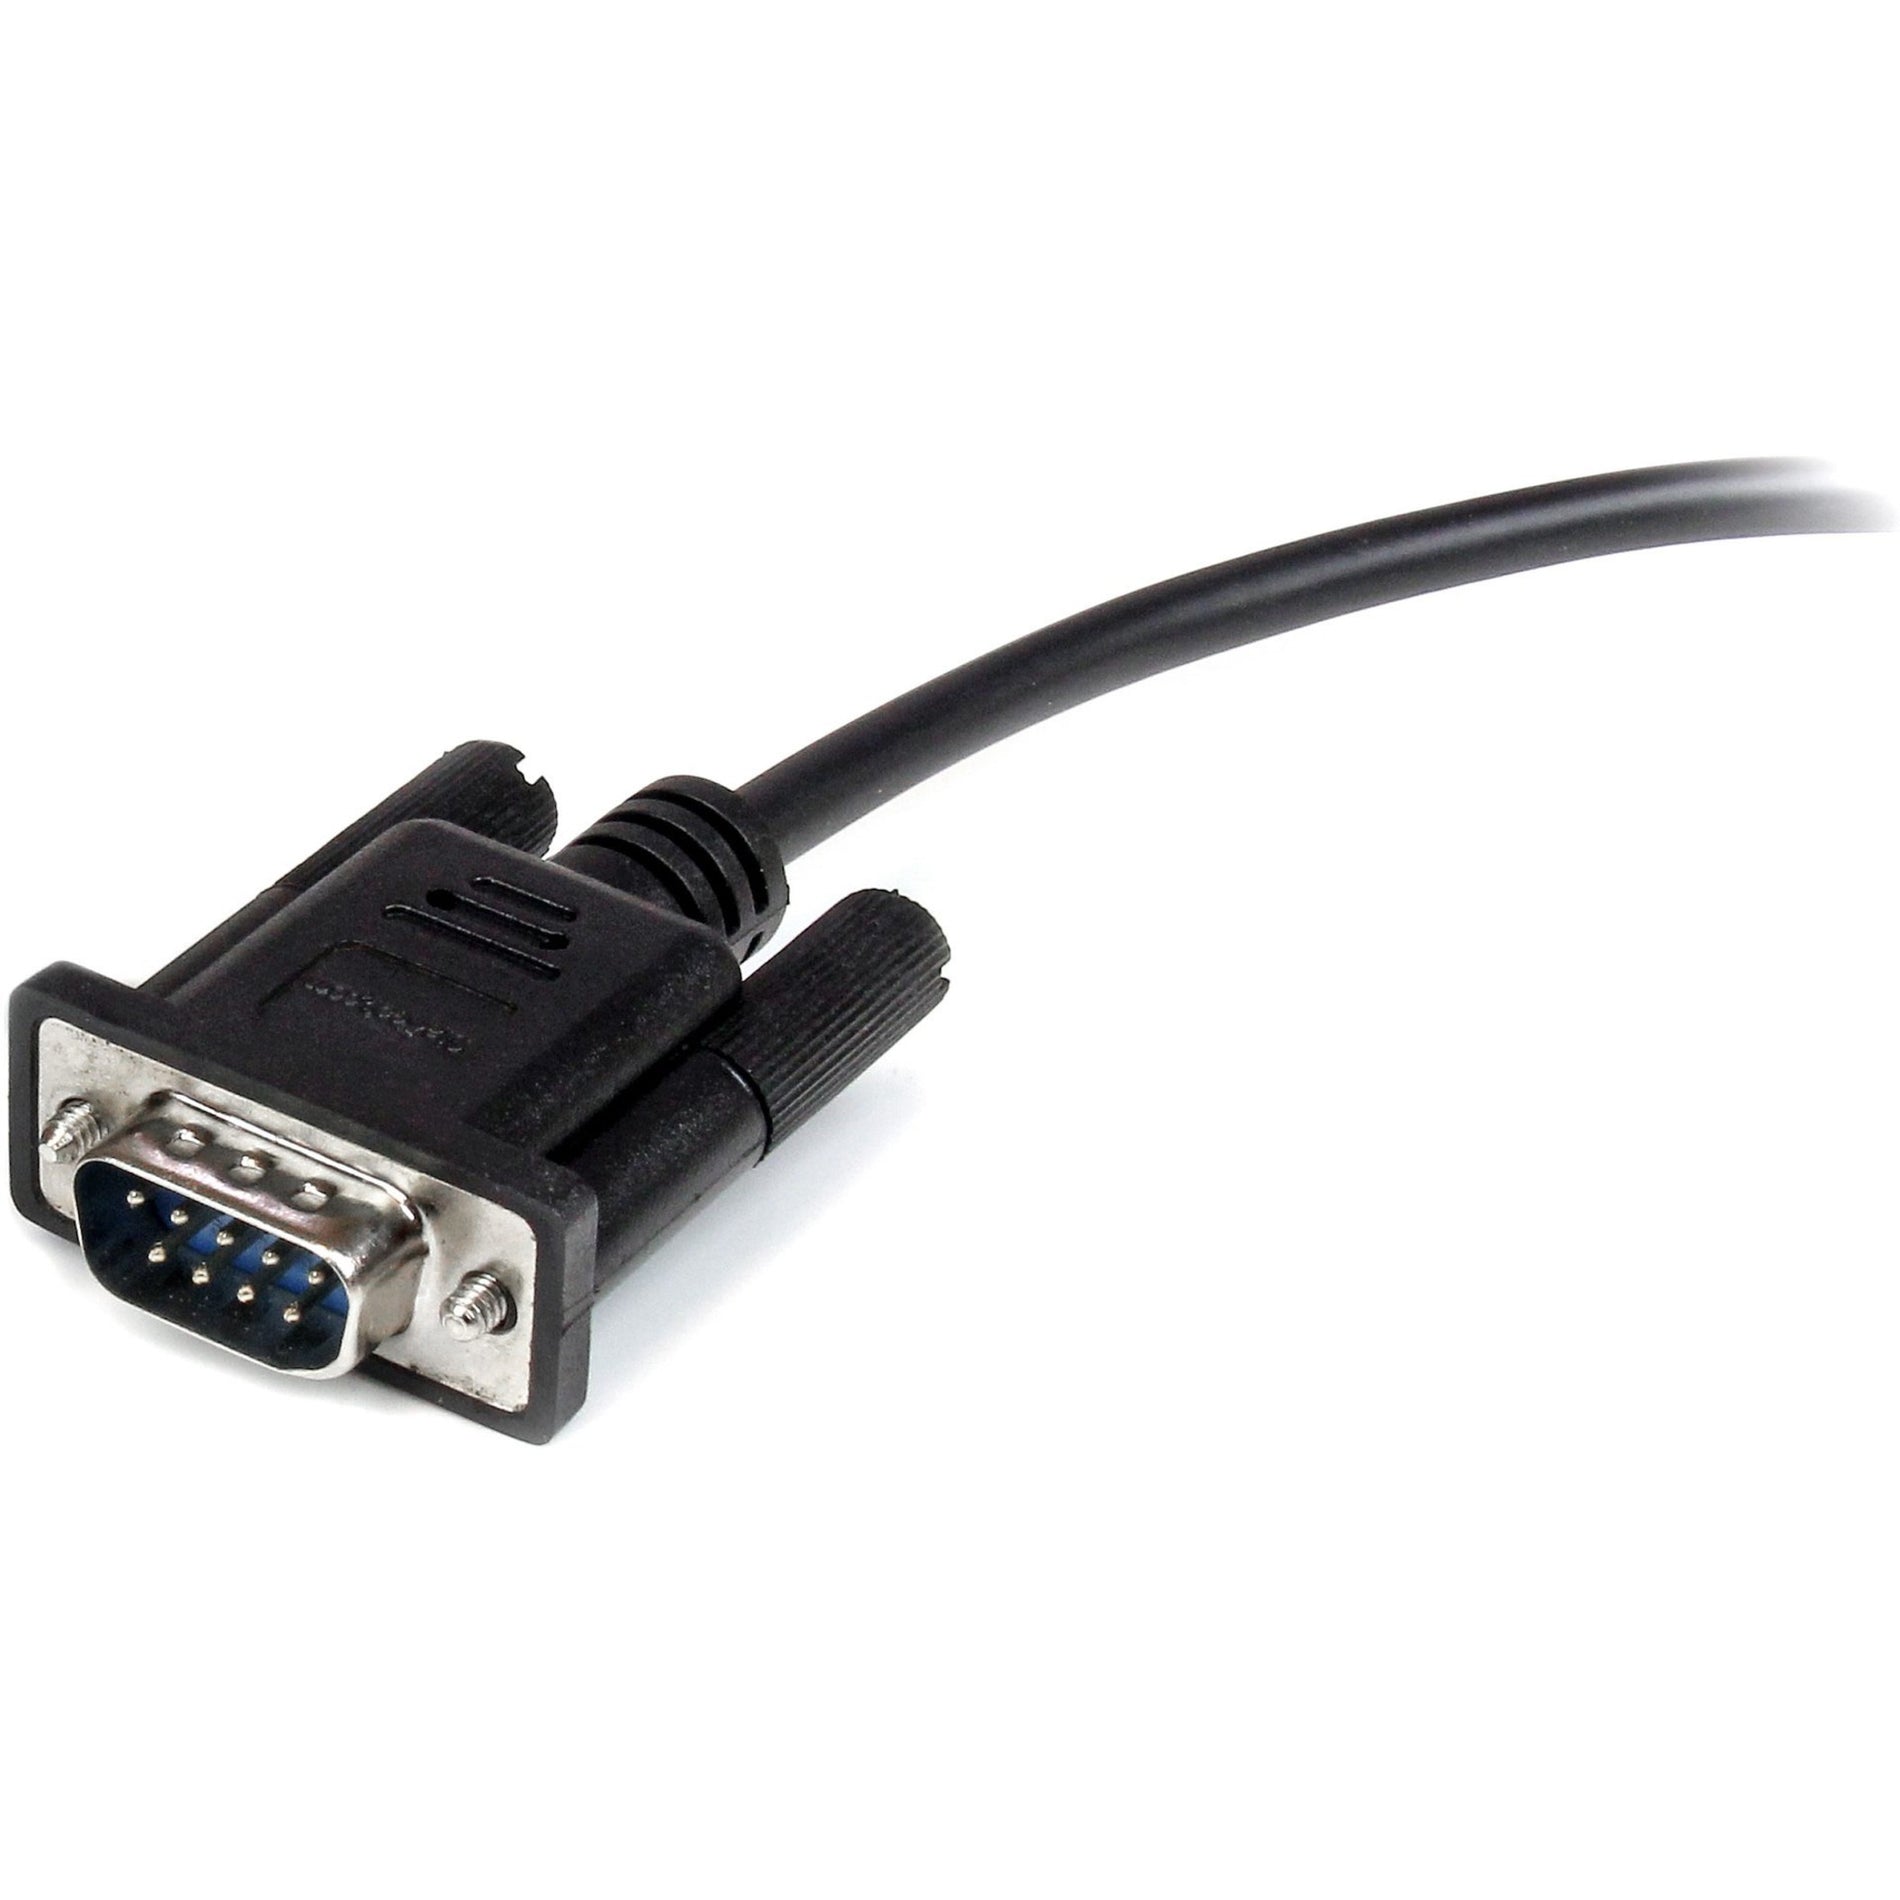 StarTech.com MXT1002MBK 2m Black Straight Through DB9 RS232 Serial Cable - M/F, Molded, Copper Conductor, Shielded